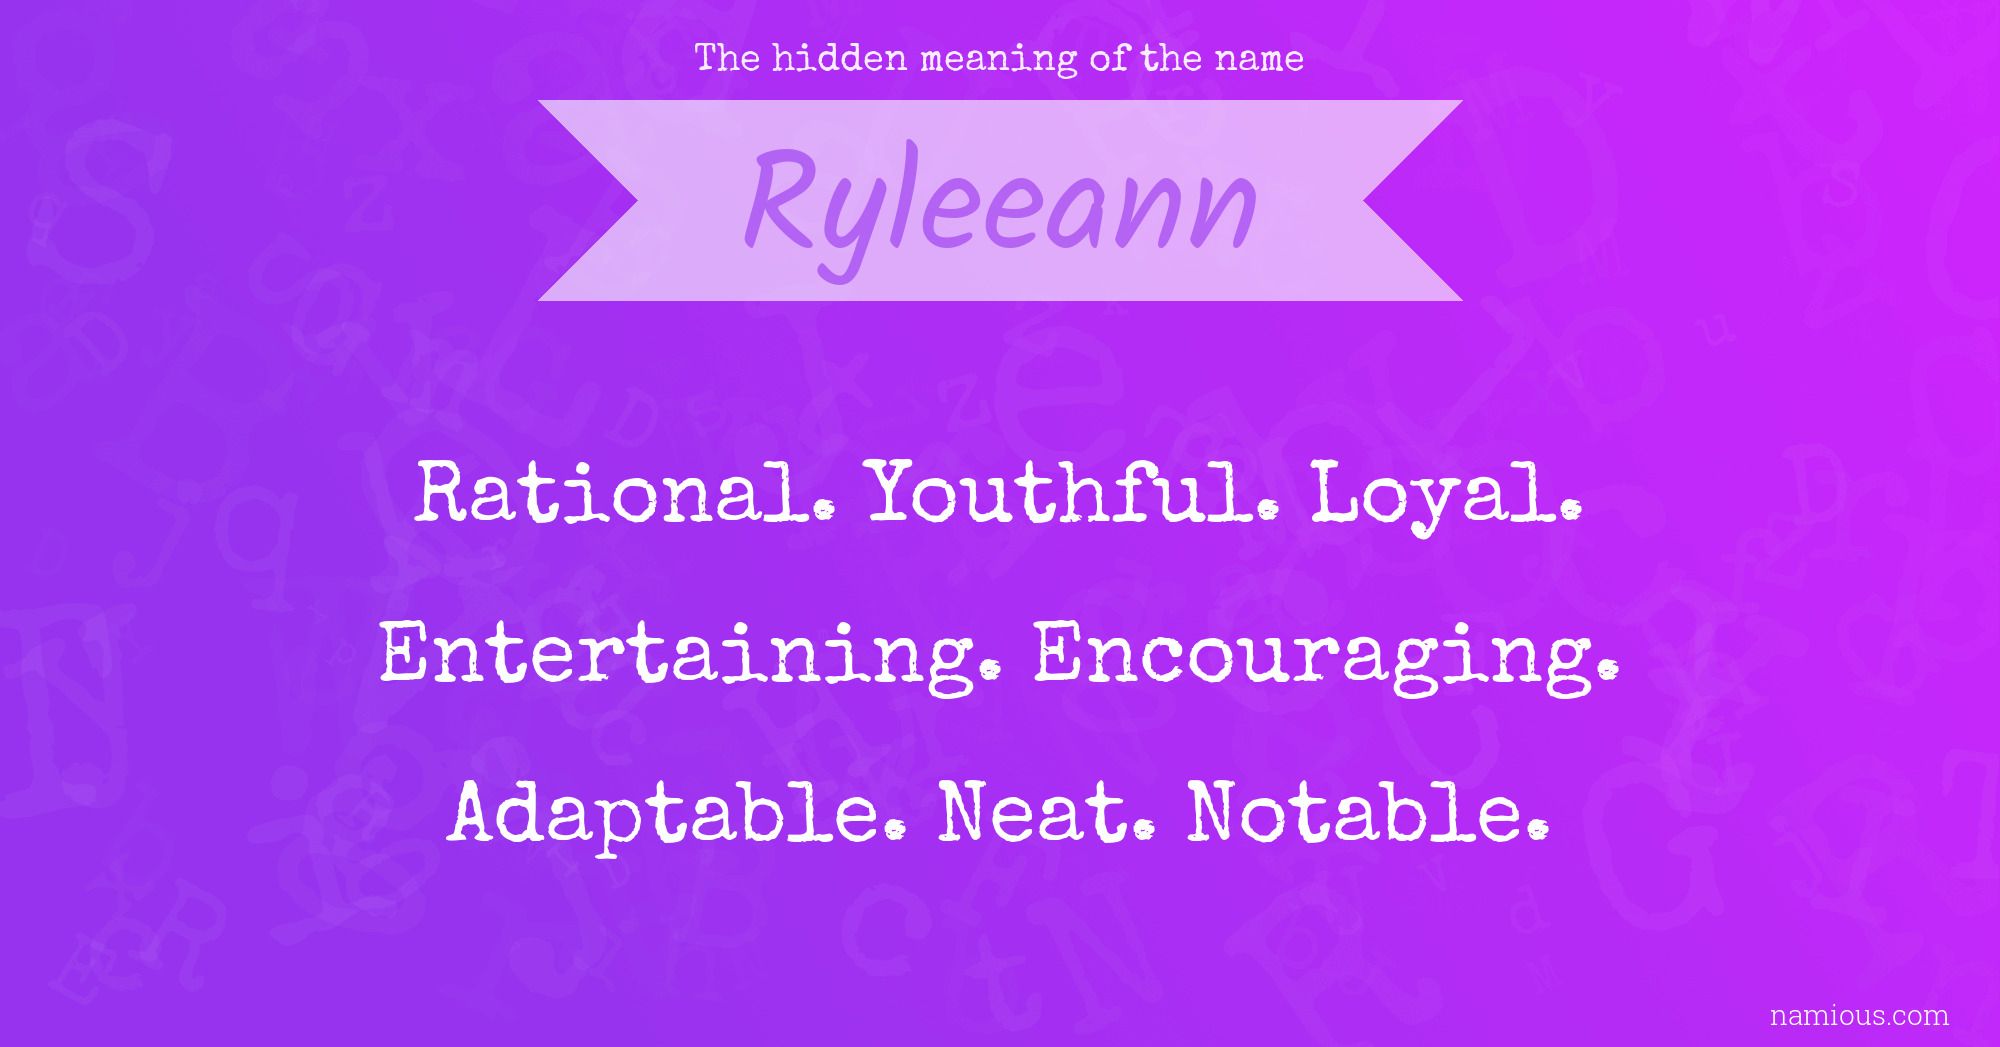 The hidden meaning of the name Ryleeann